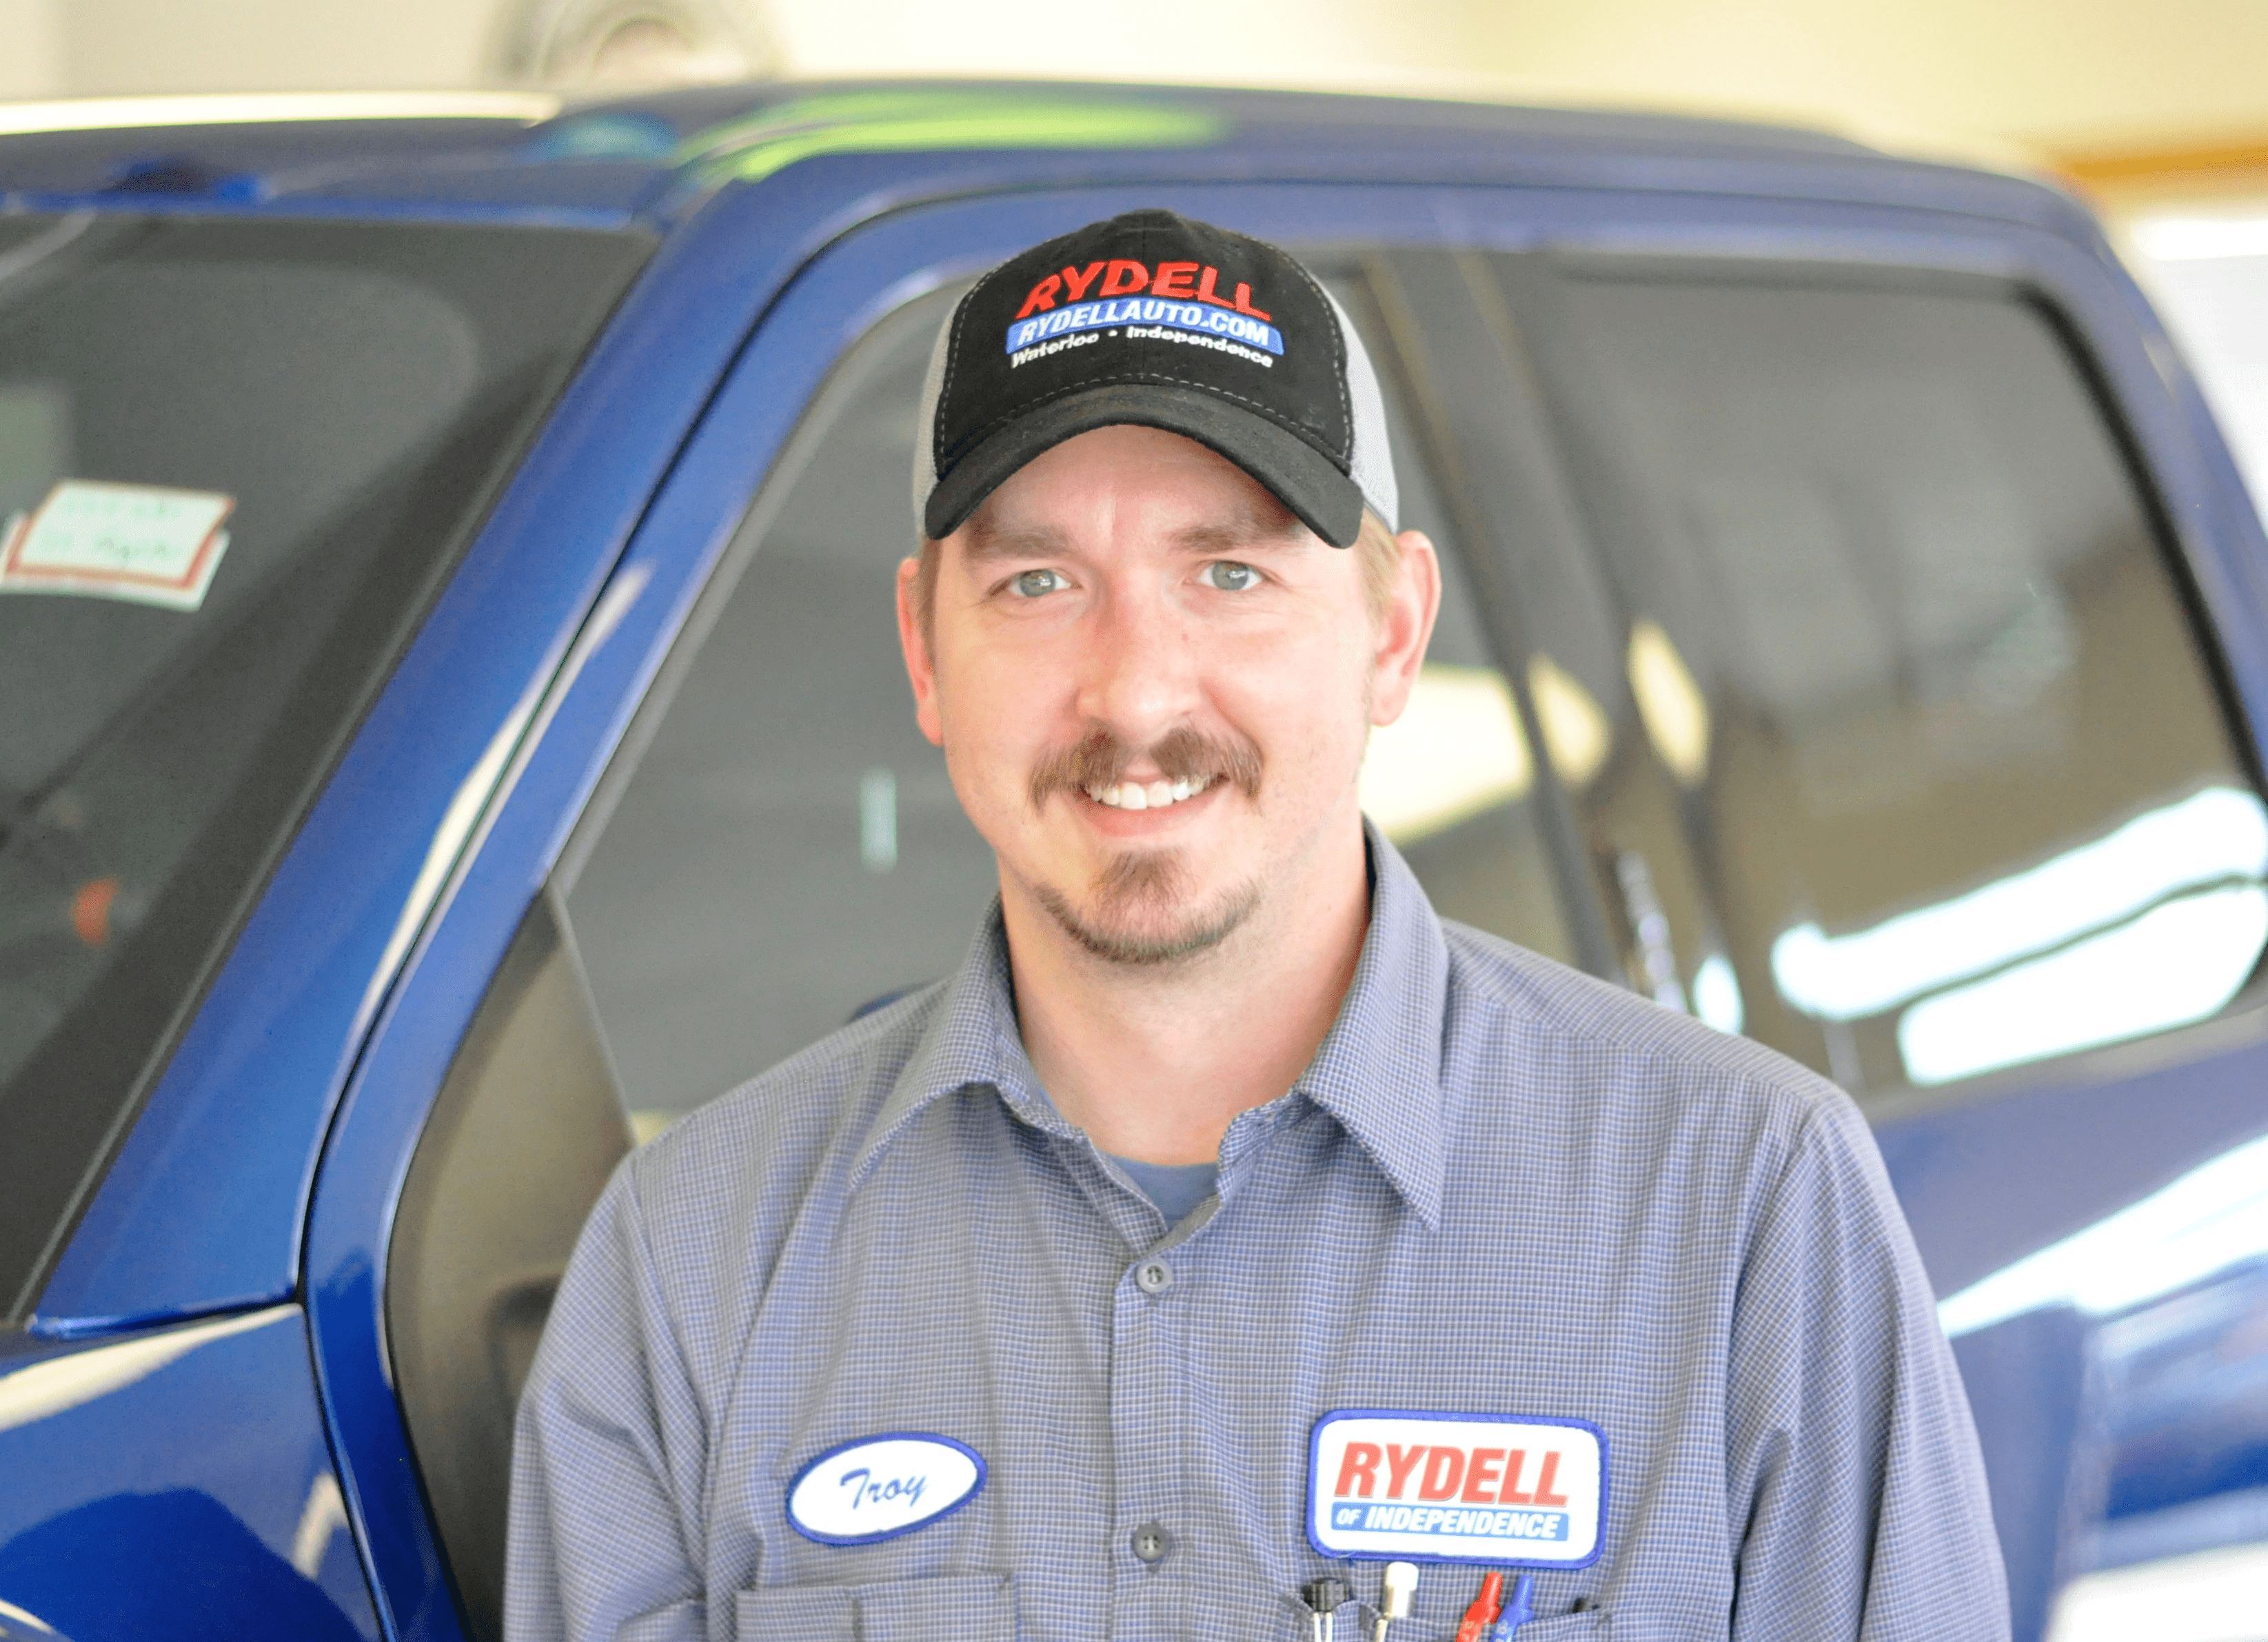 Troy Beier at Rydell Auto in Waterloo IA